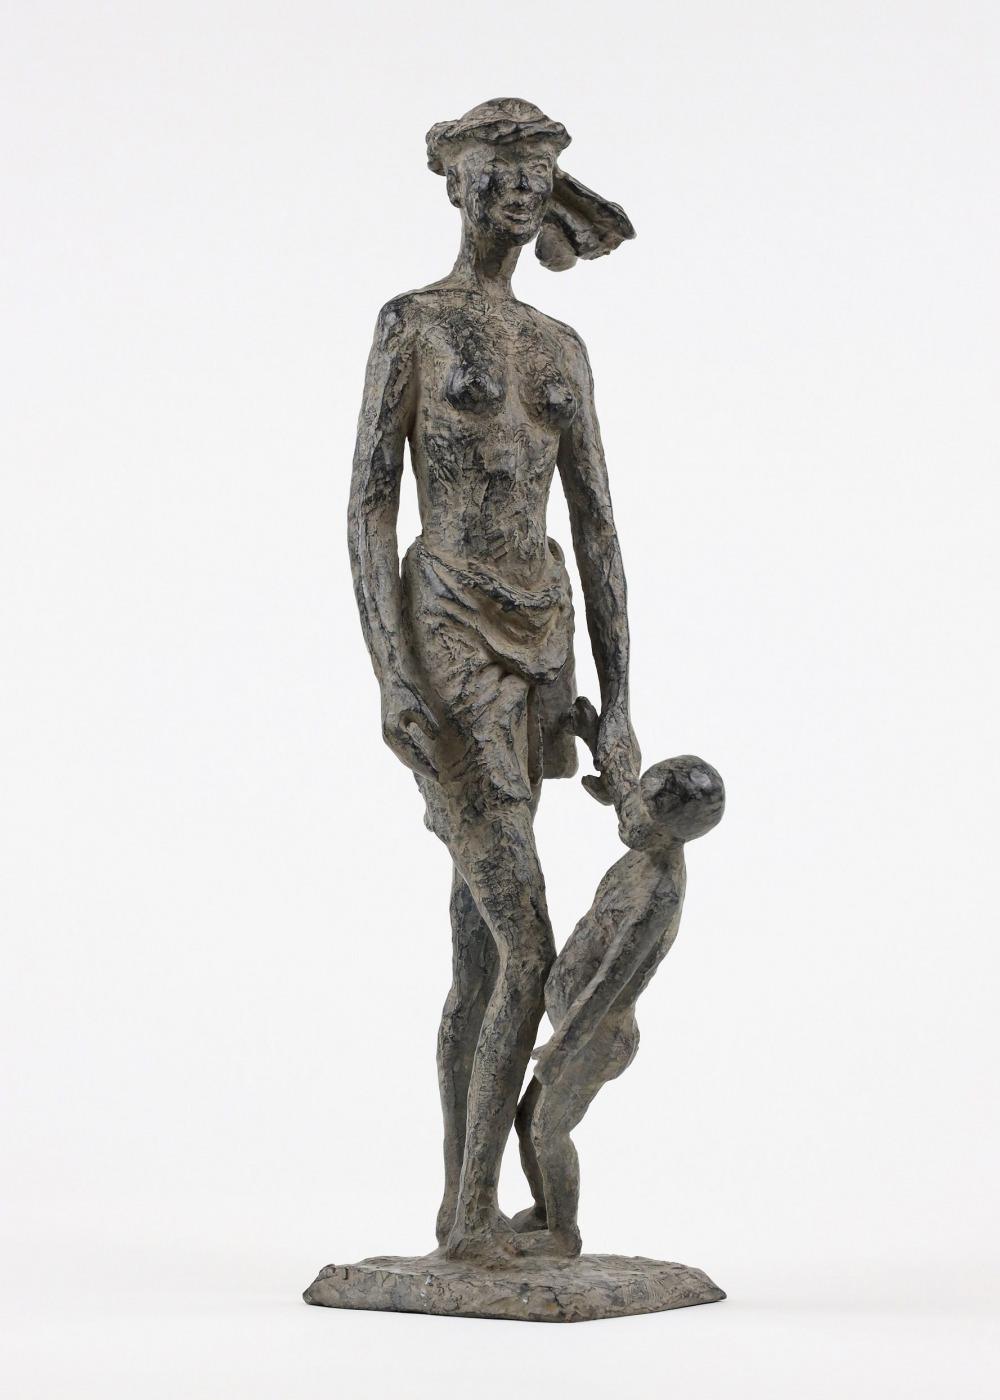 All the time in the world is a bronze sculpture by French contemporary artist Marine de Soos, dimensions are 40 × 17 × 12 cm (15.7 × 6.7 × 4.7 in). 
The sculpture is signed and numbered, it is part of a limited edition of 8 editions + 4 artist’s